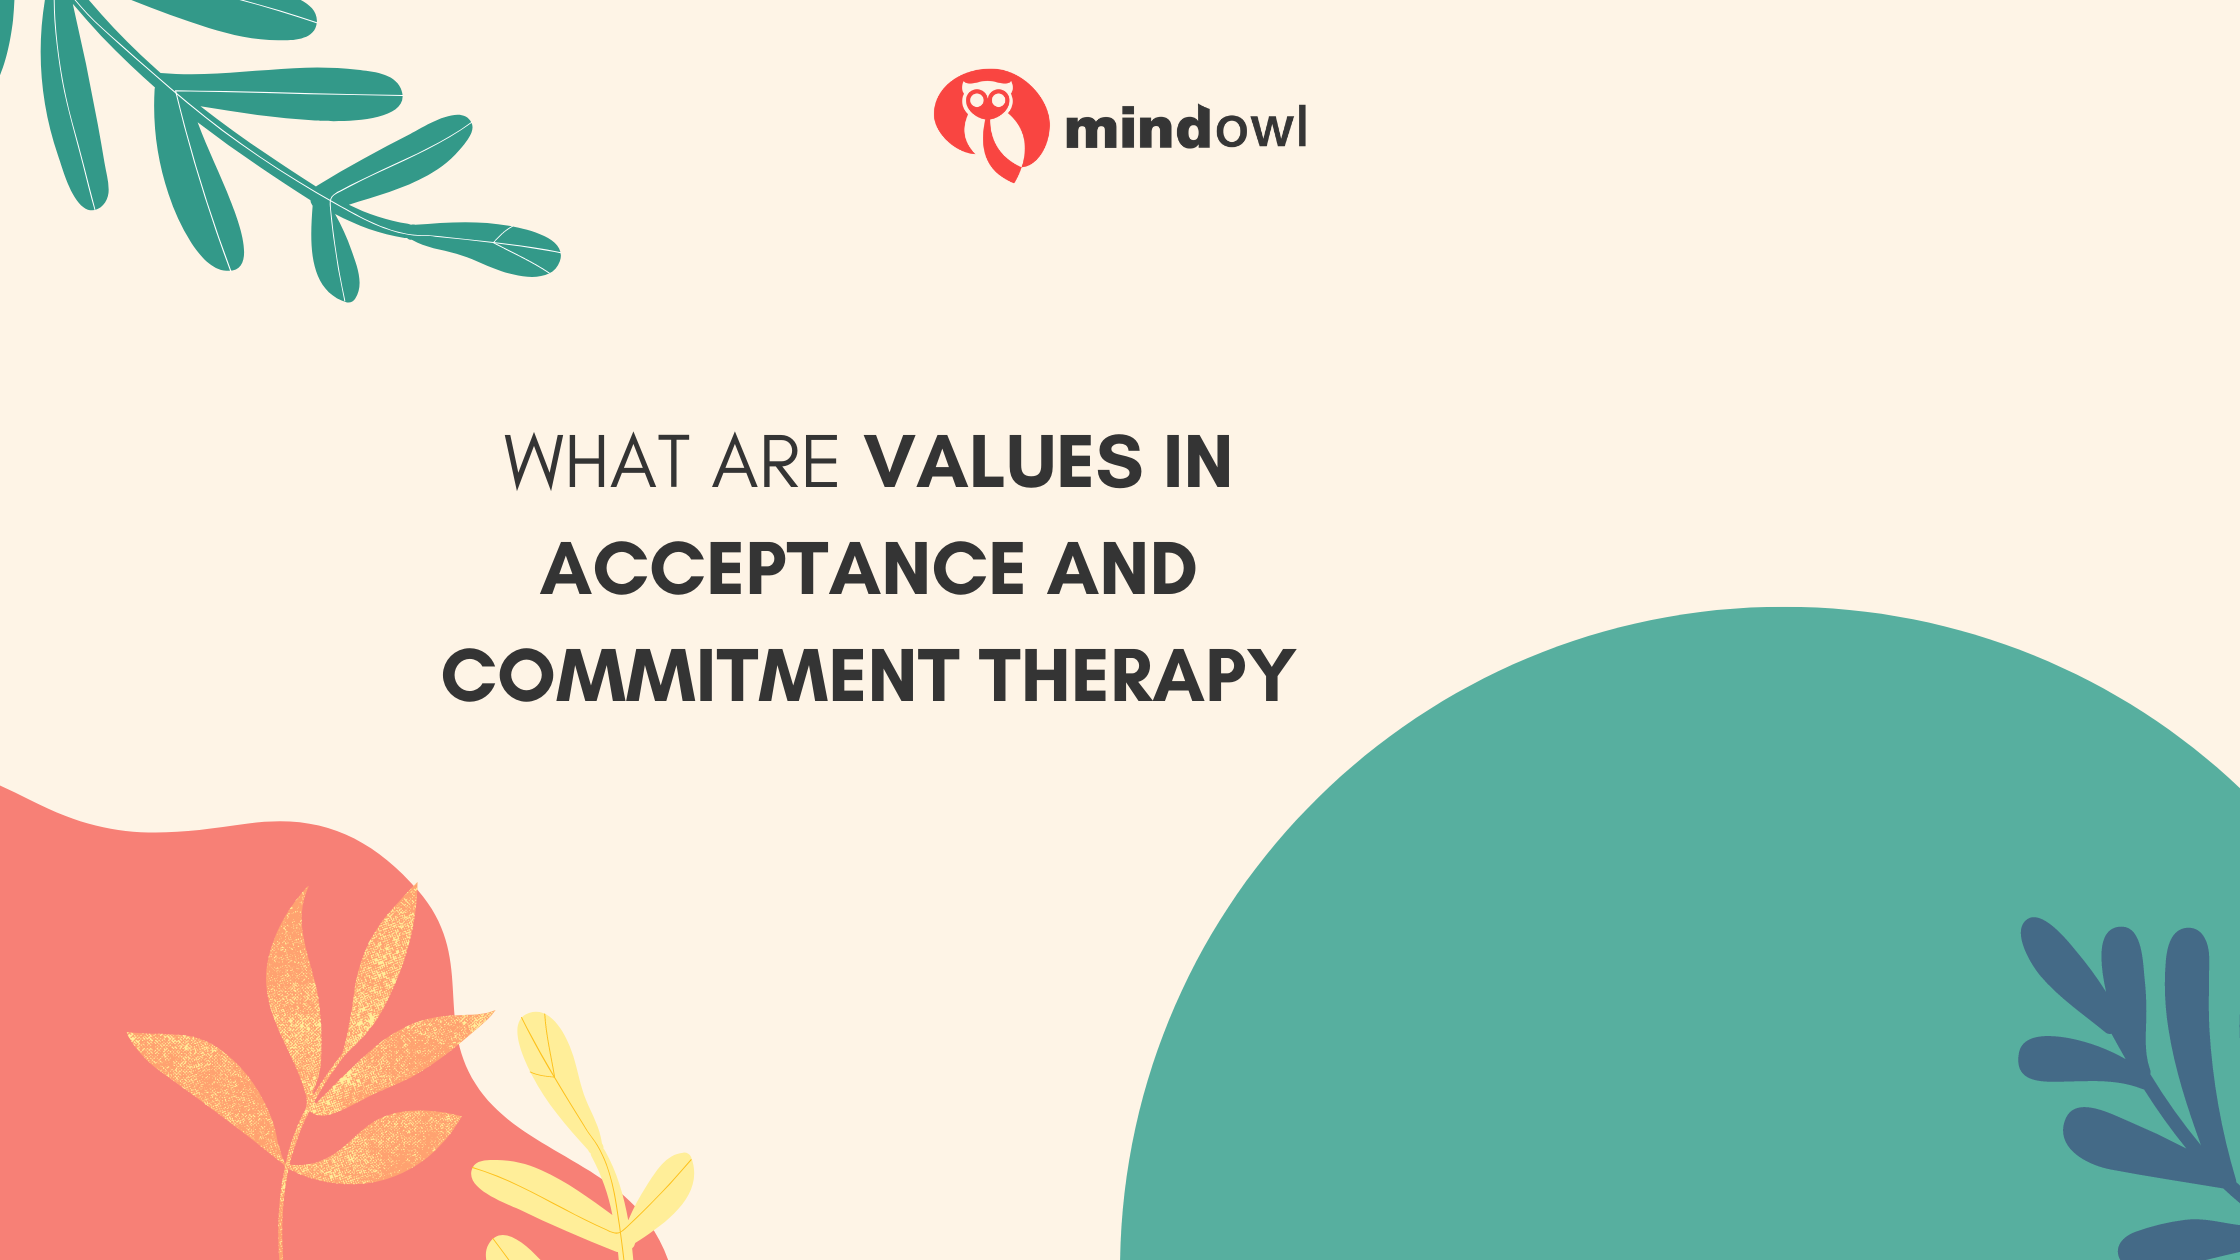 What Are Values In Acceptance And Commitment Therapy